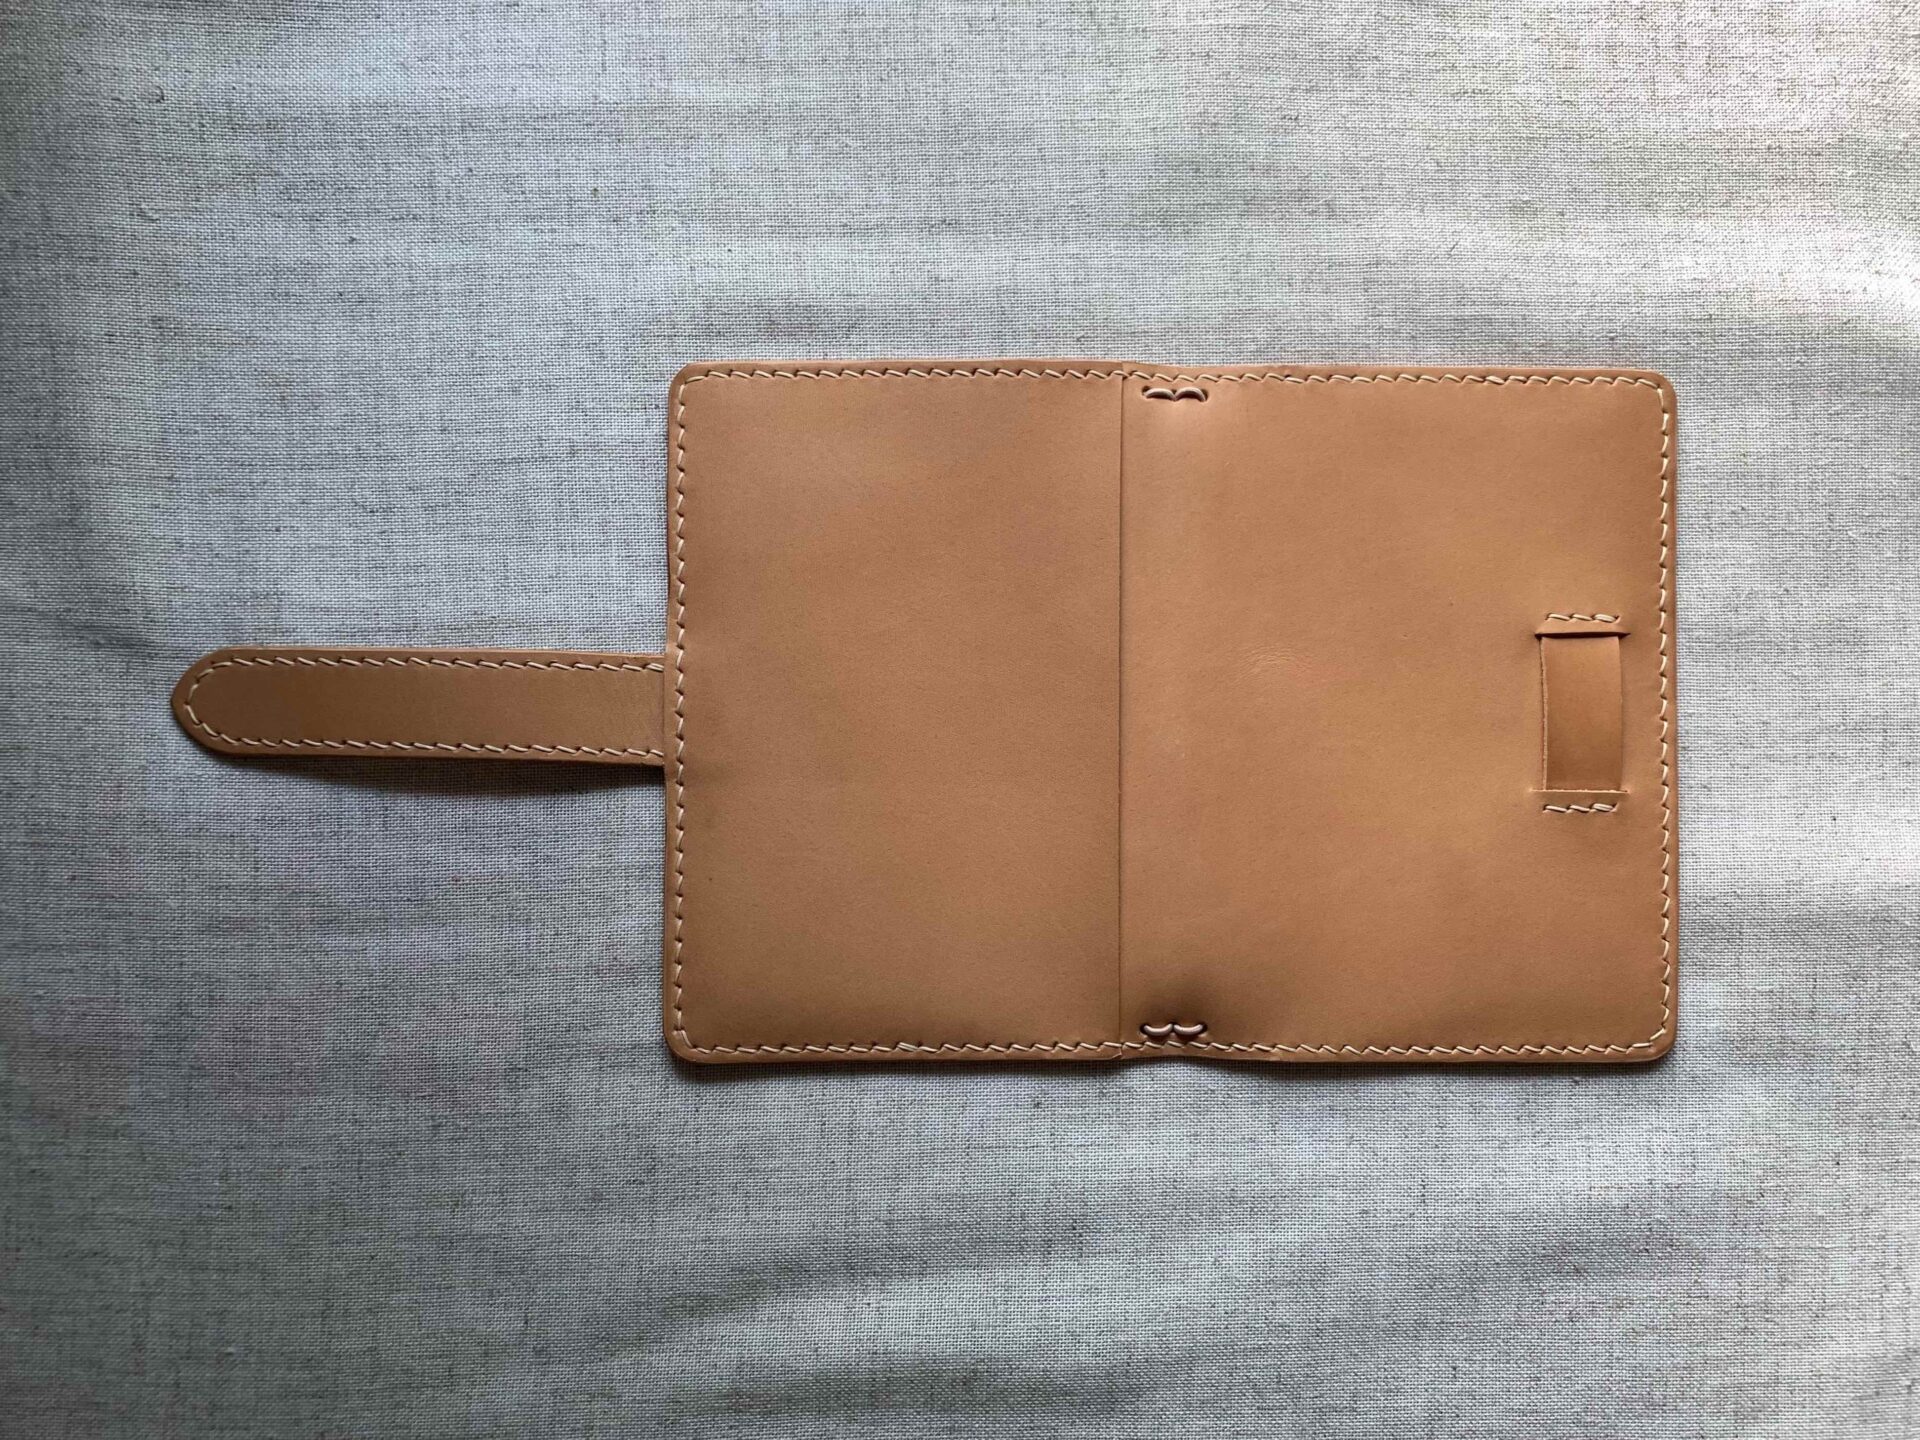 Pocket-size cover with belt closure